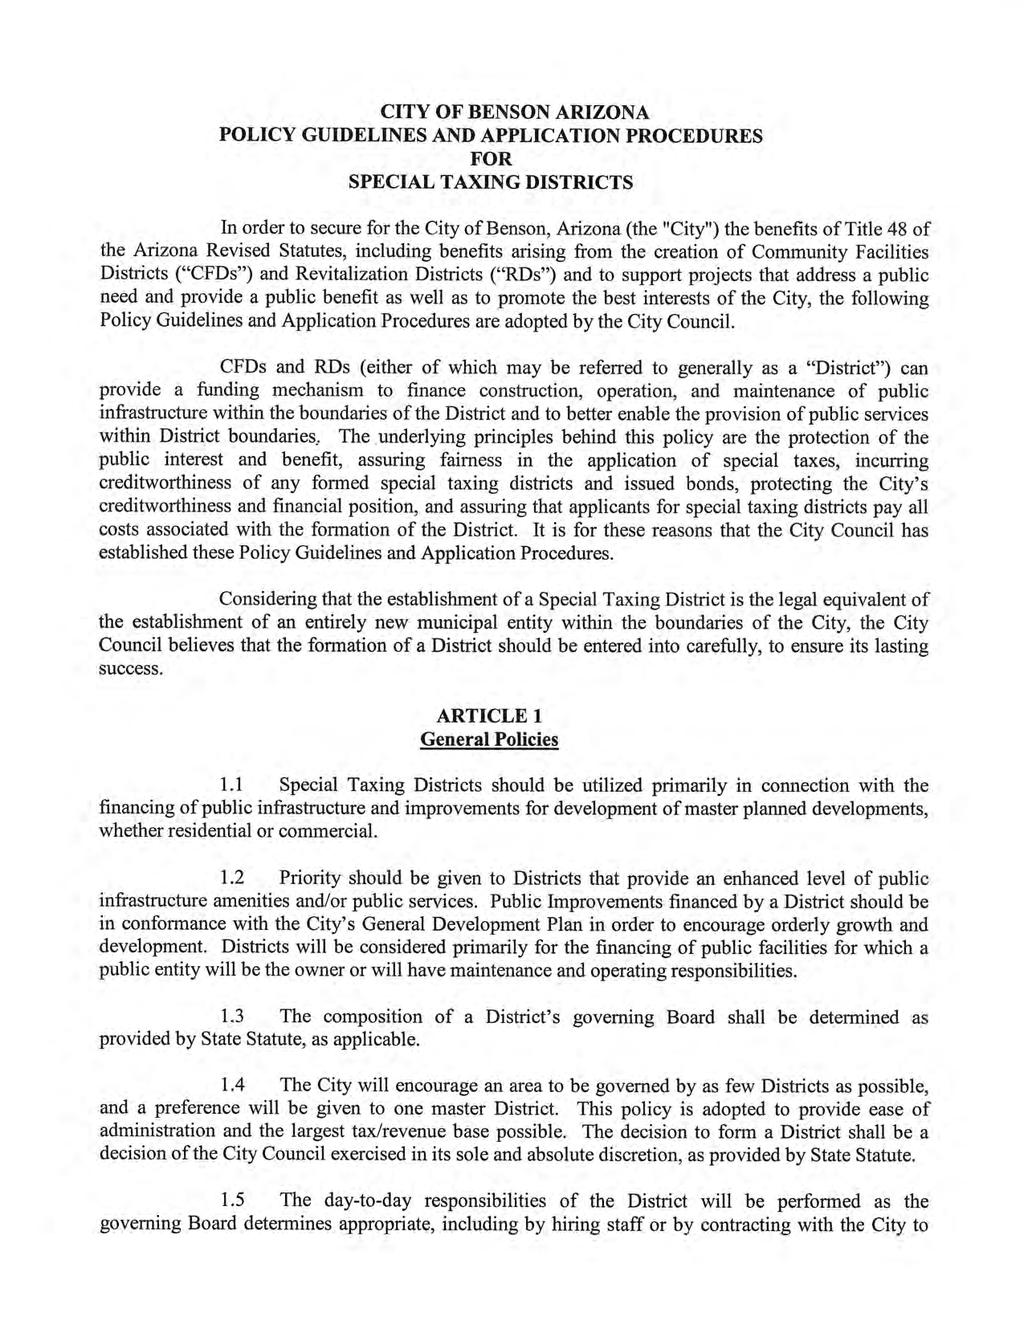 CITY OF BENSON ARIZONA POLICY GUIDELINES AND APPLICATION PROCEDURES FOR SPECIAL TAXING DISTRICTS In order to secure for the City of Benson, Arizona (the "City") the benefits of Title 48 of the